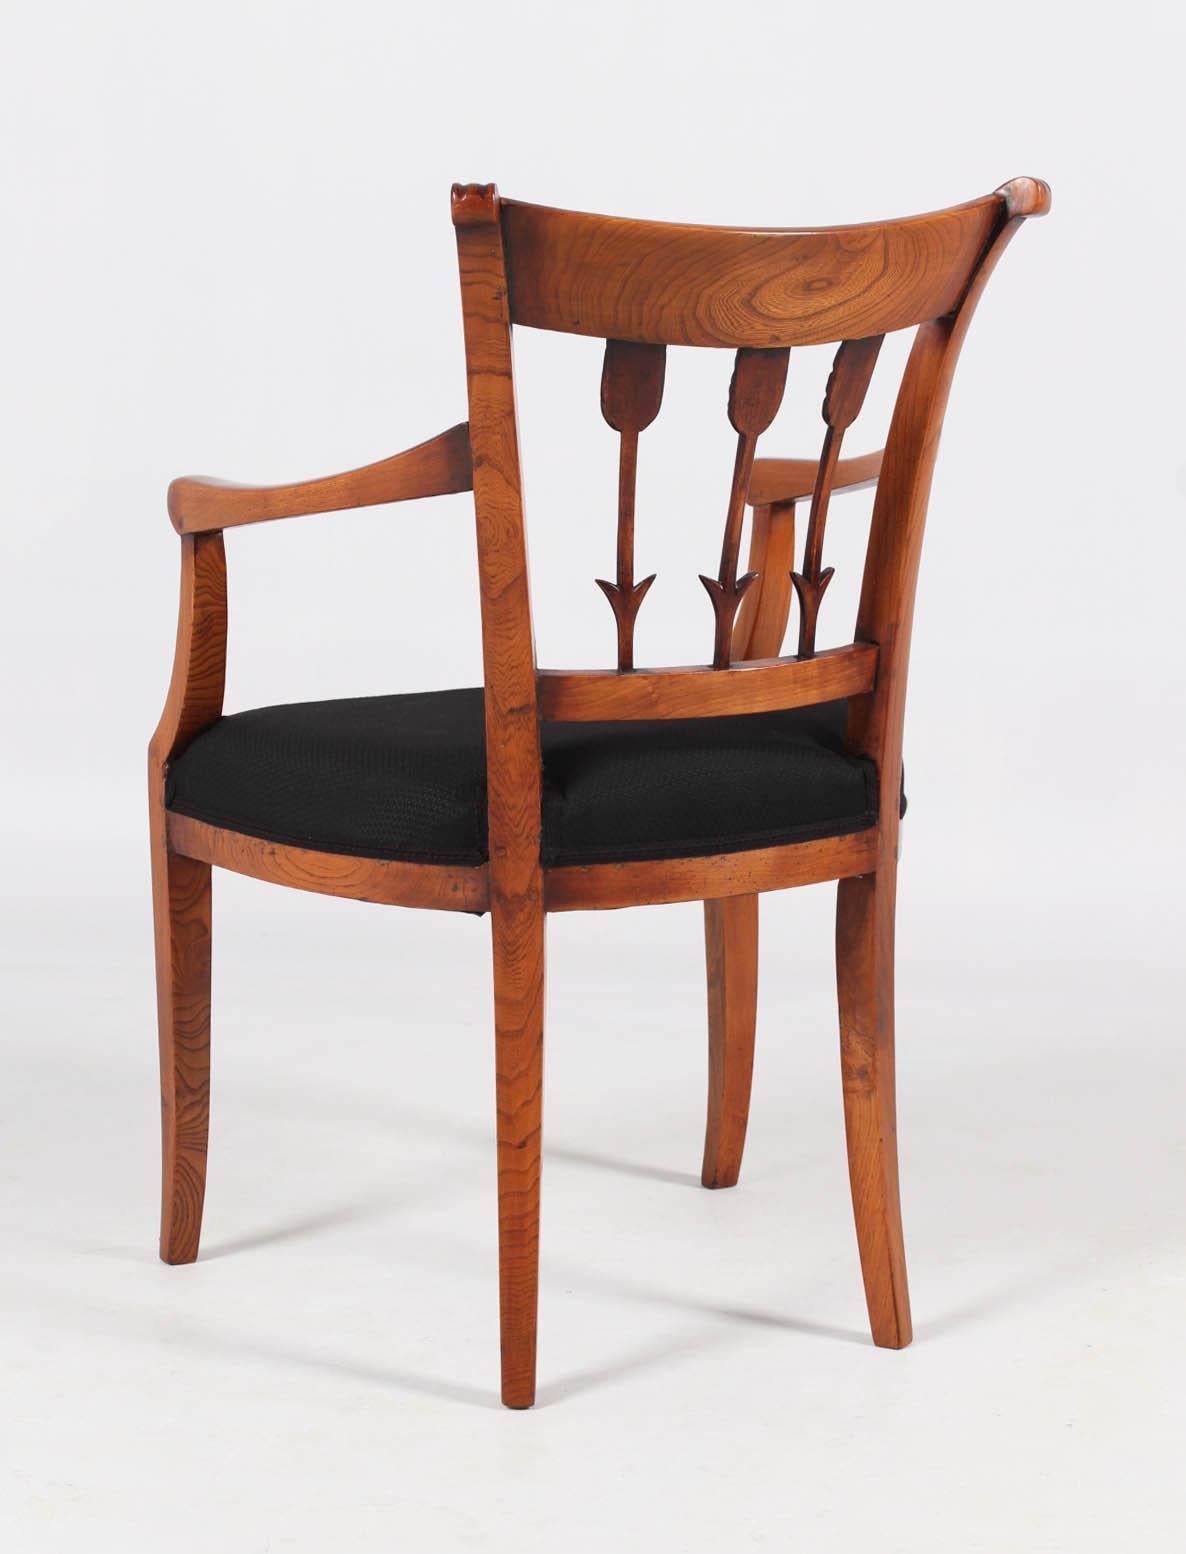 Antique arm chair

Netherlands
Ash
Directoire around 1800

Dimensions: seat height: ca 47 cm, back height: ca 89 cm

Slightly flared legs with a beautiful swing. The back legs elegantly merge into the backrest.
Beautifully designed back